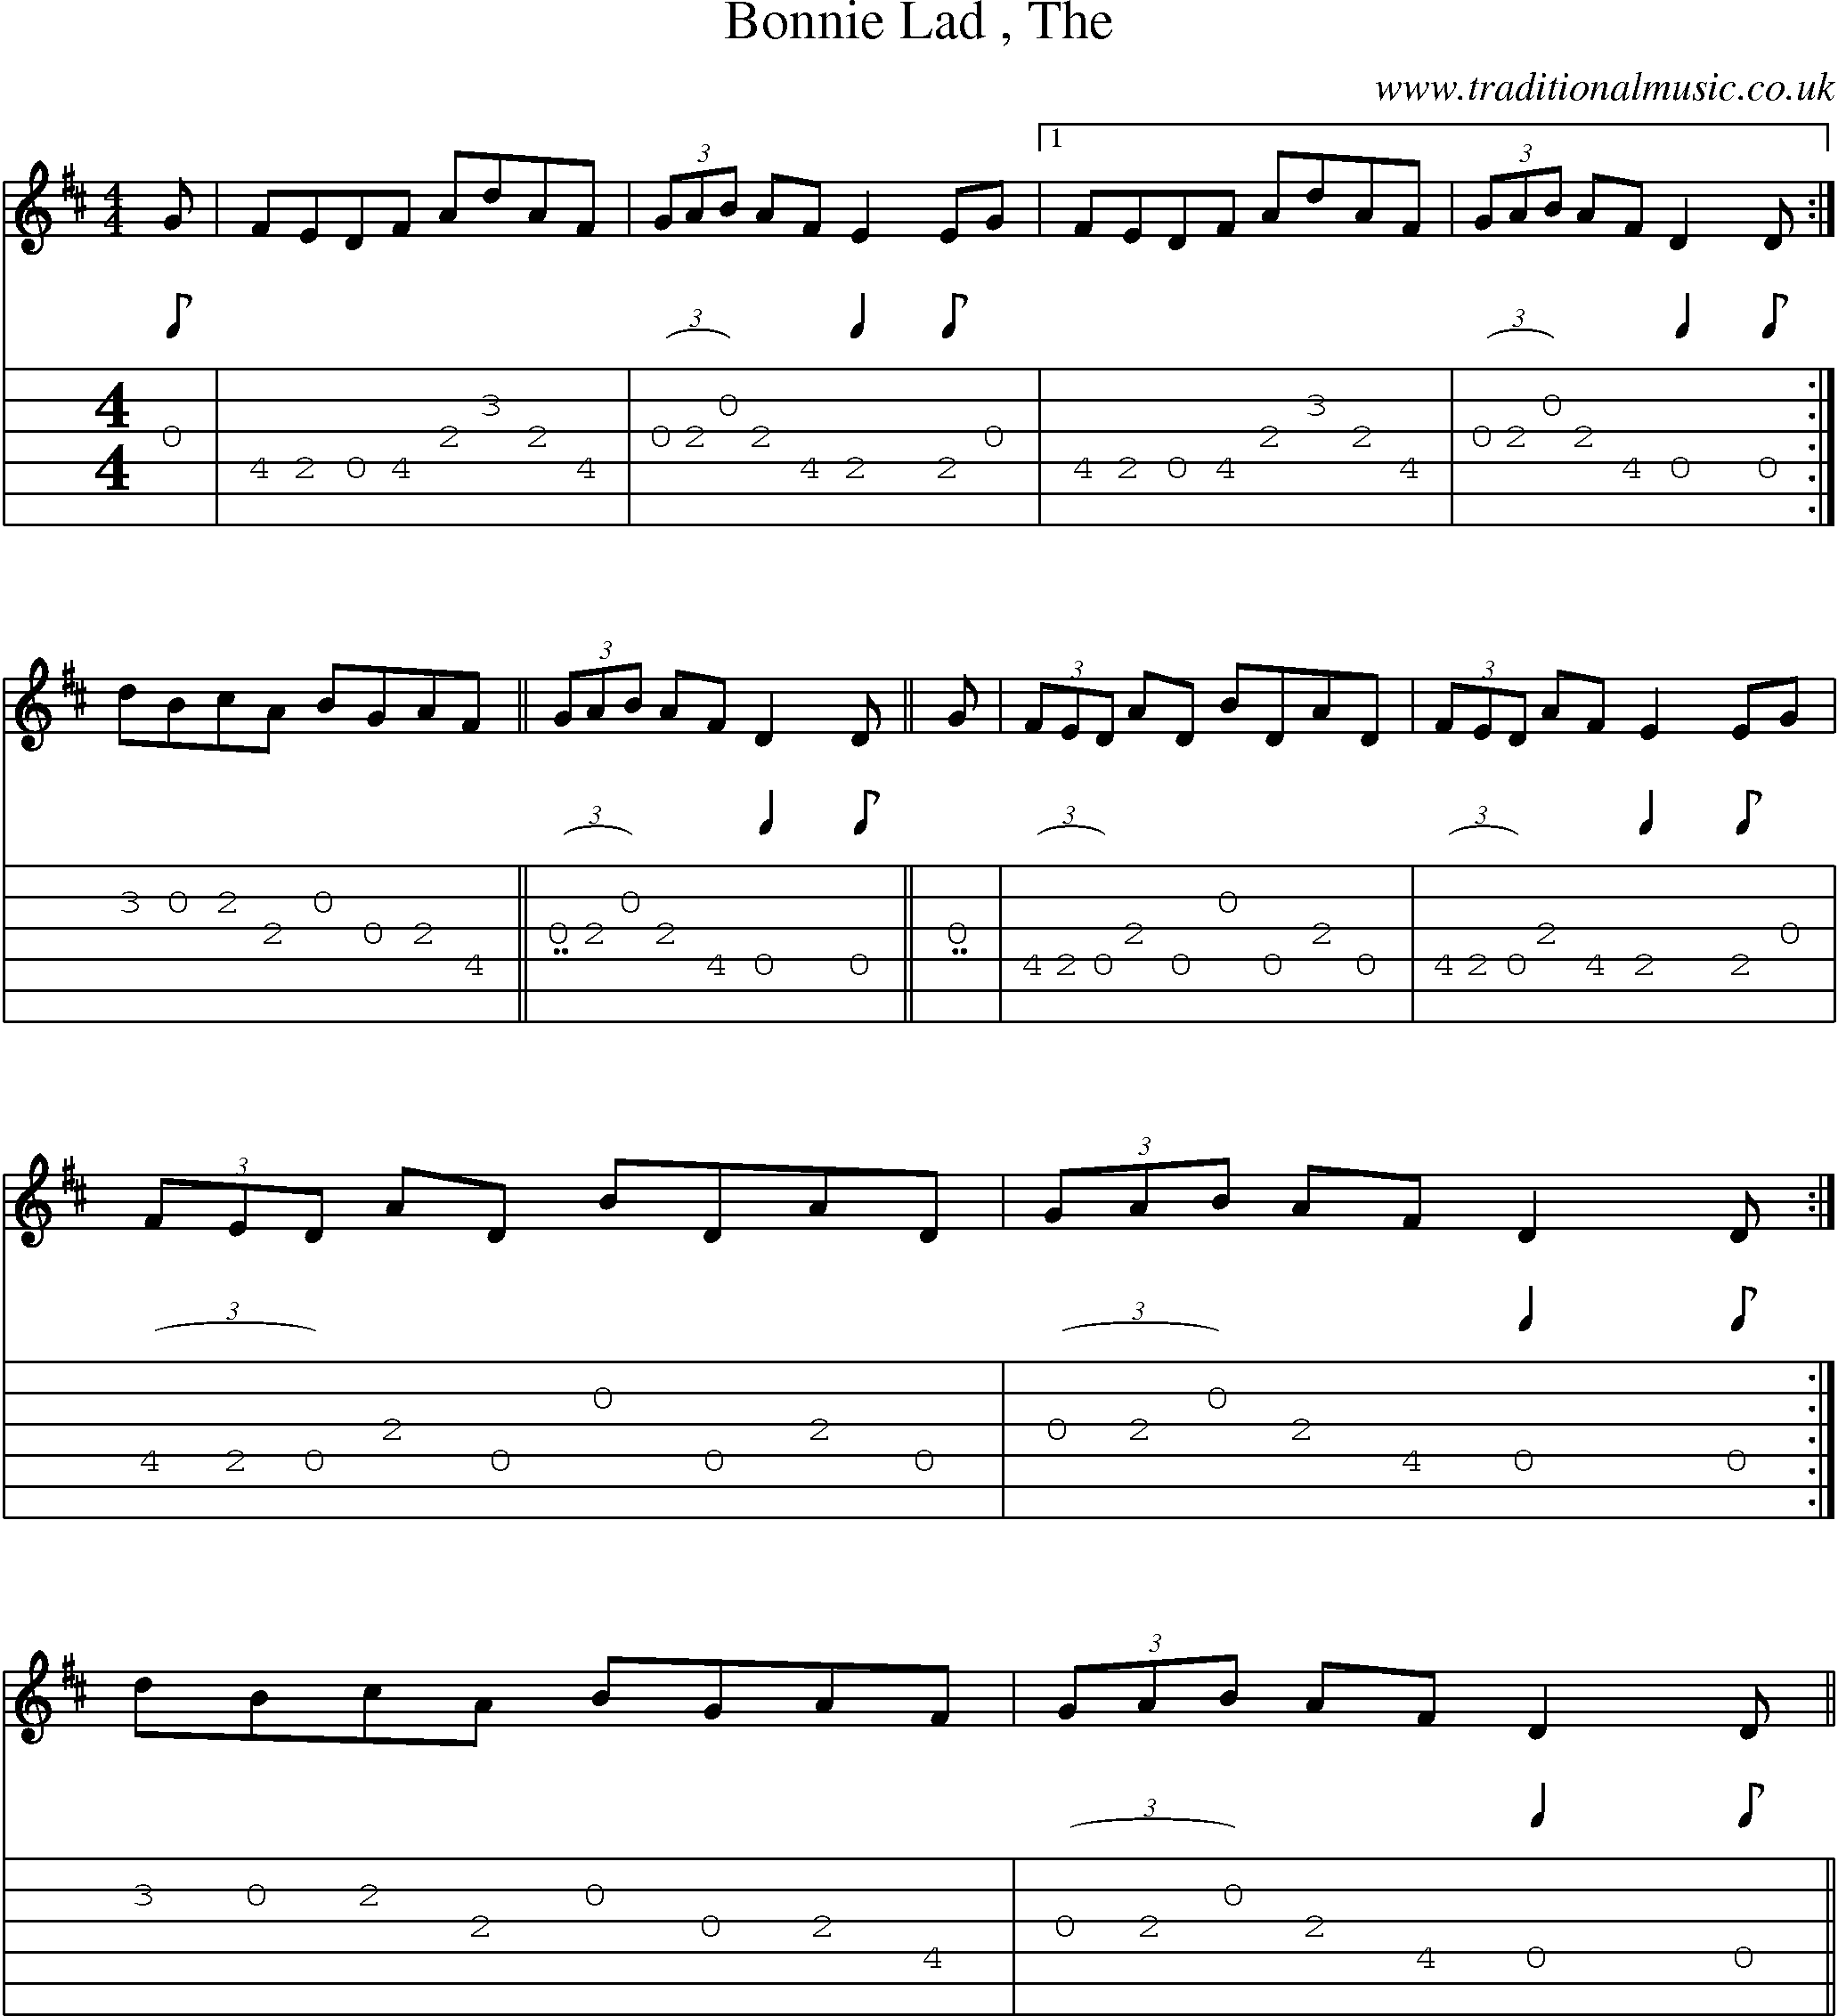 Music Score and Guitar Tabs for Bonnie Lad